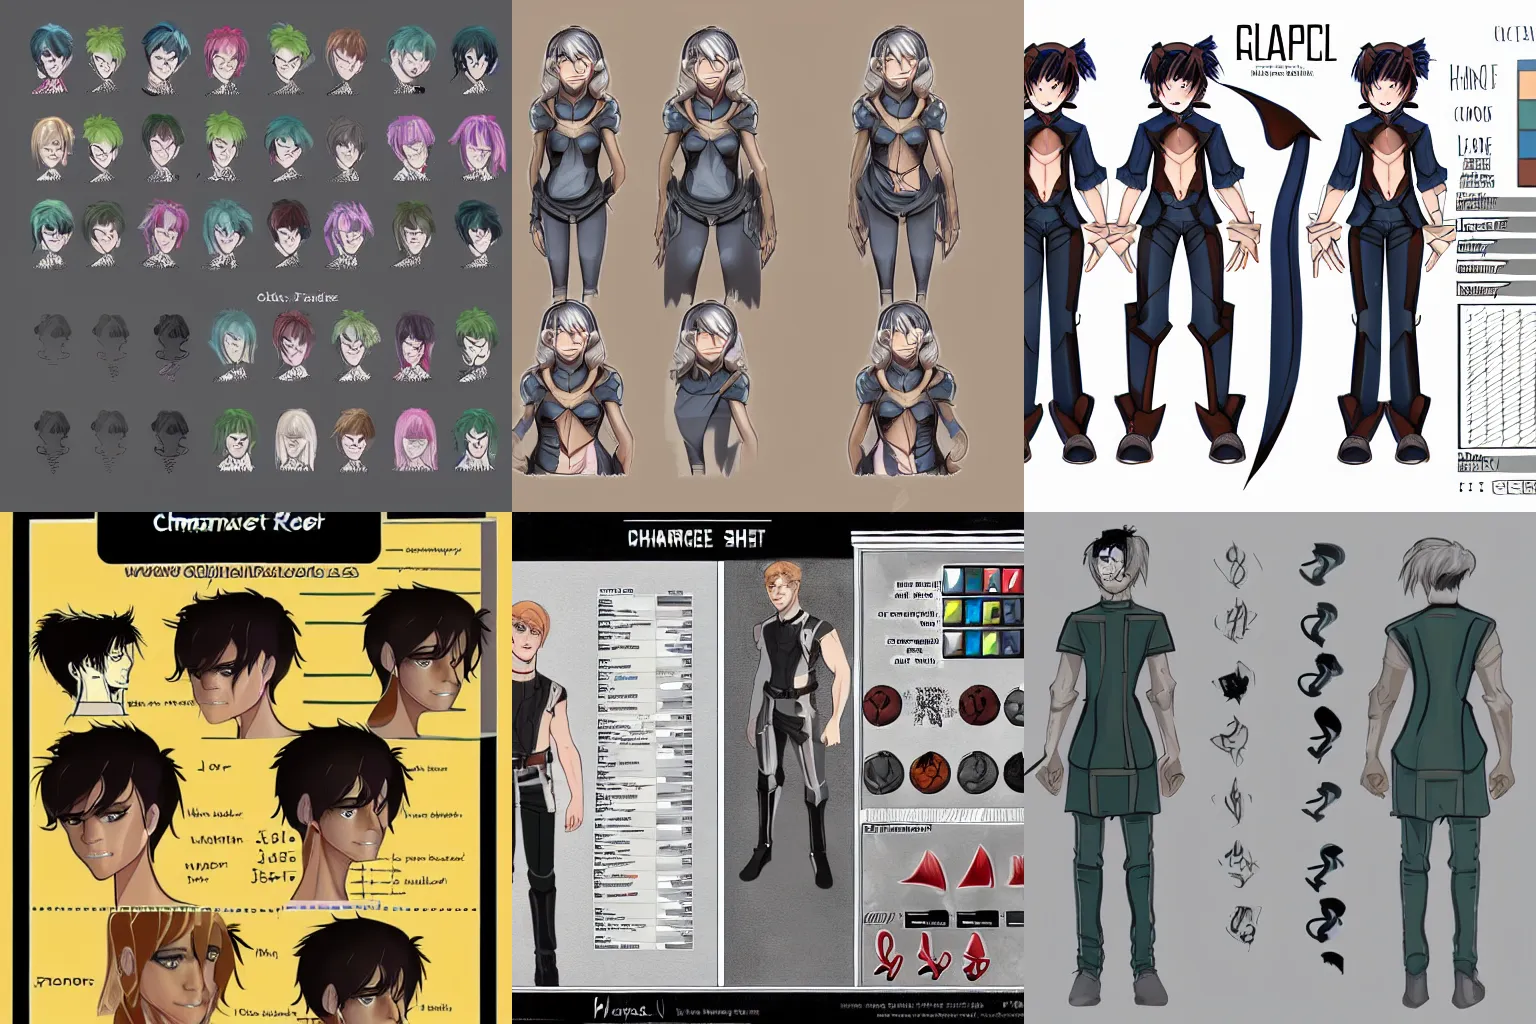 FOR HIRE] Anime-style character reference sheet commissions and more,  starting at 35 USD! Portfolio and more info in comments, DM if interested  :-) : r/HungryArtists